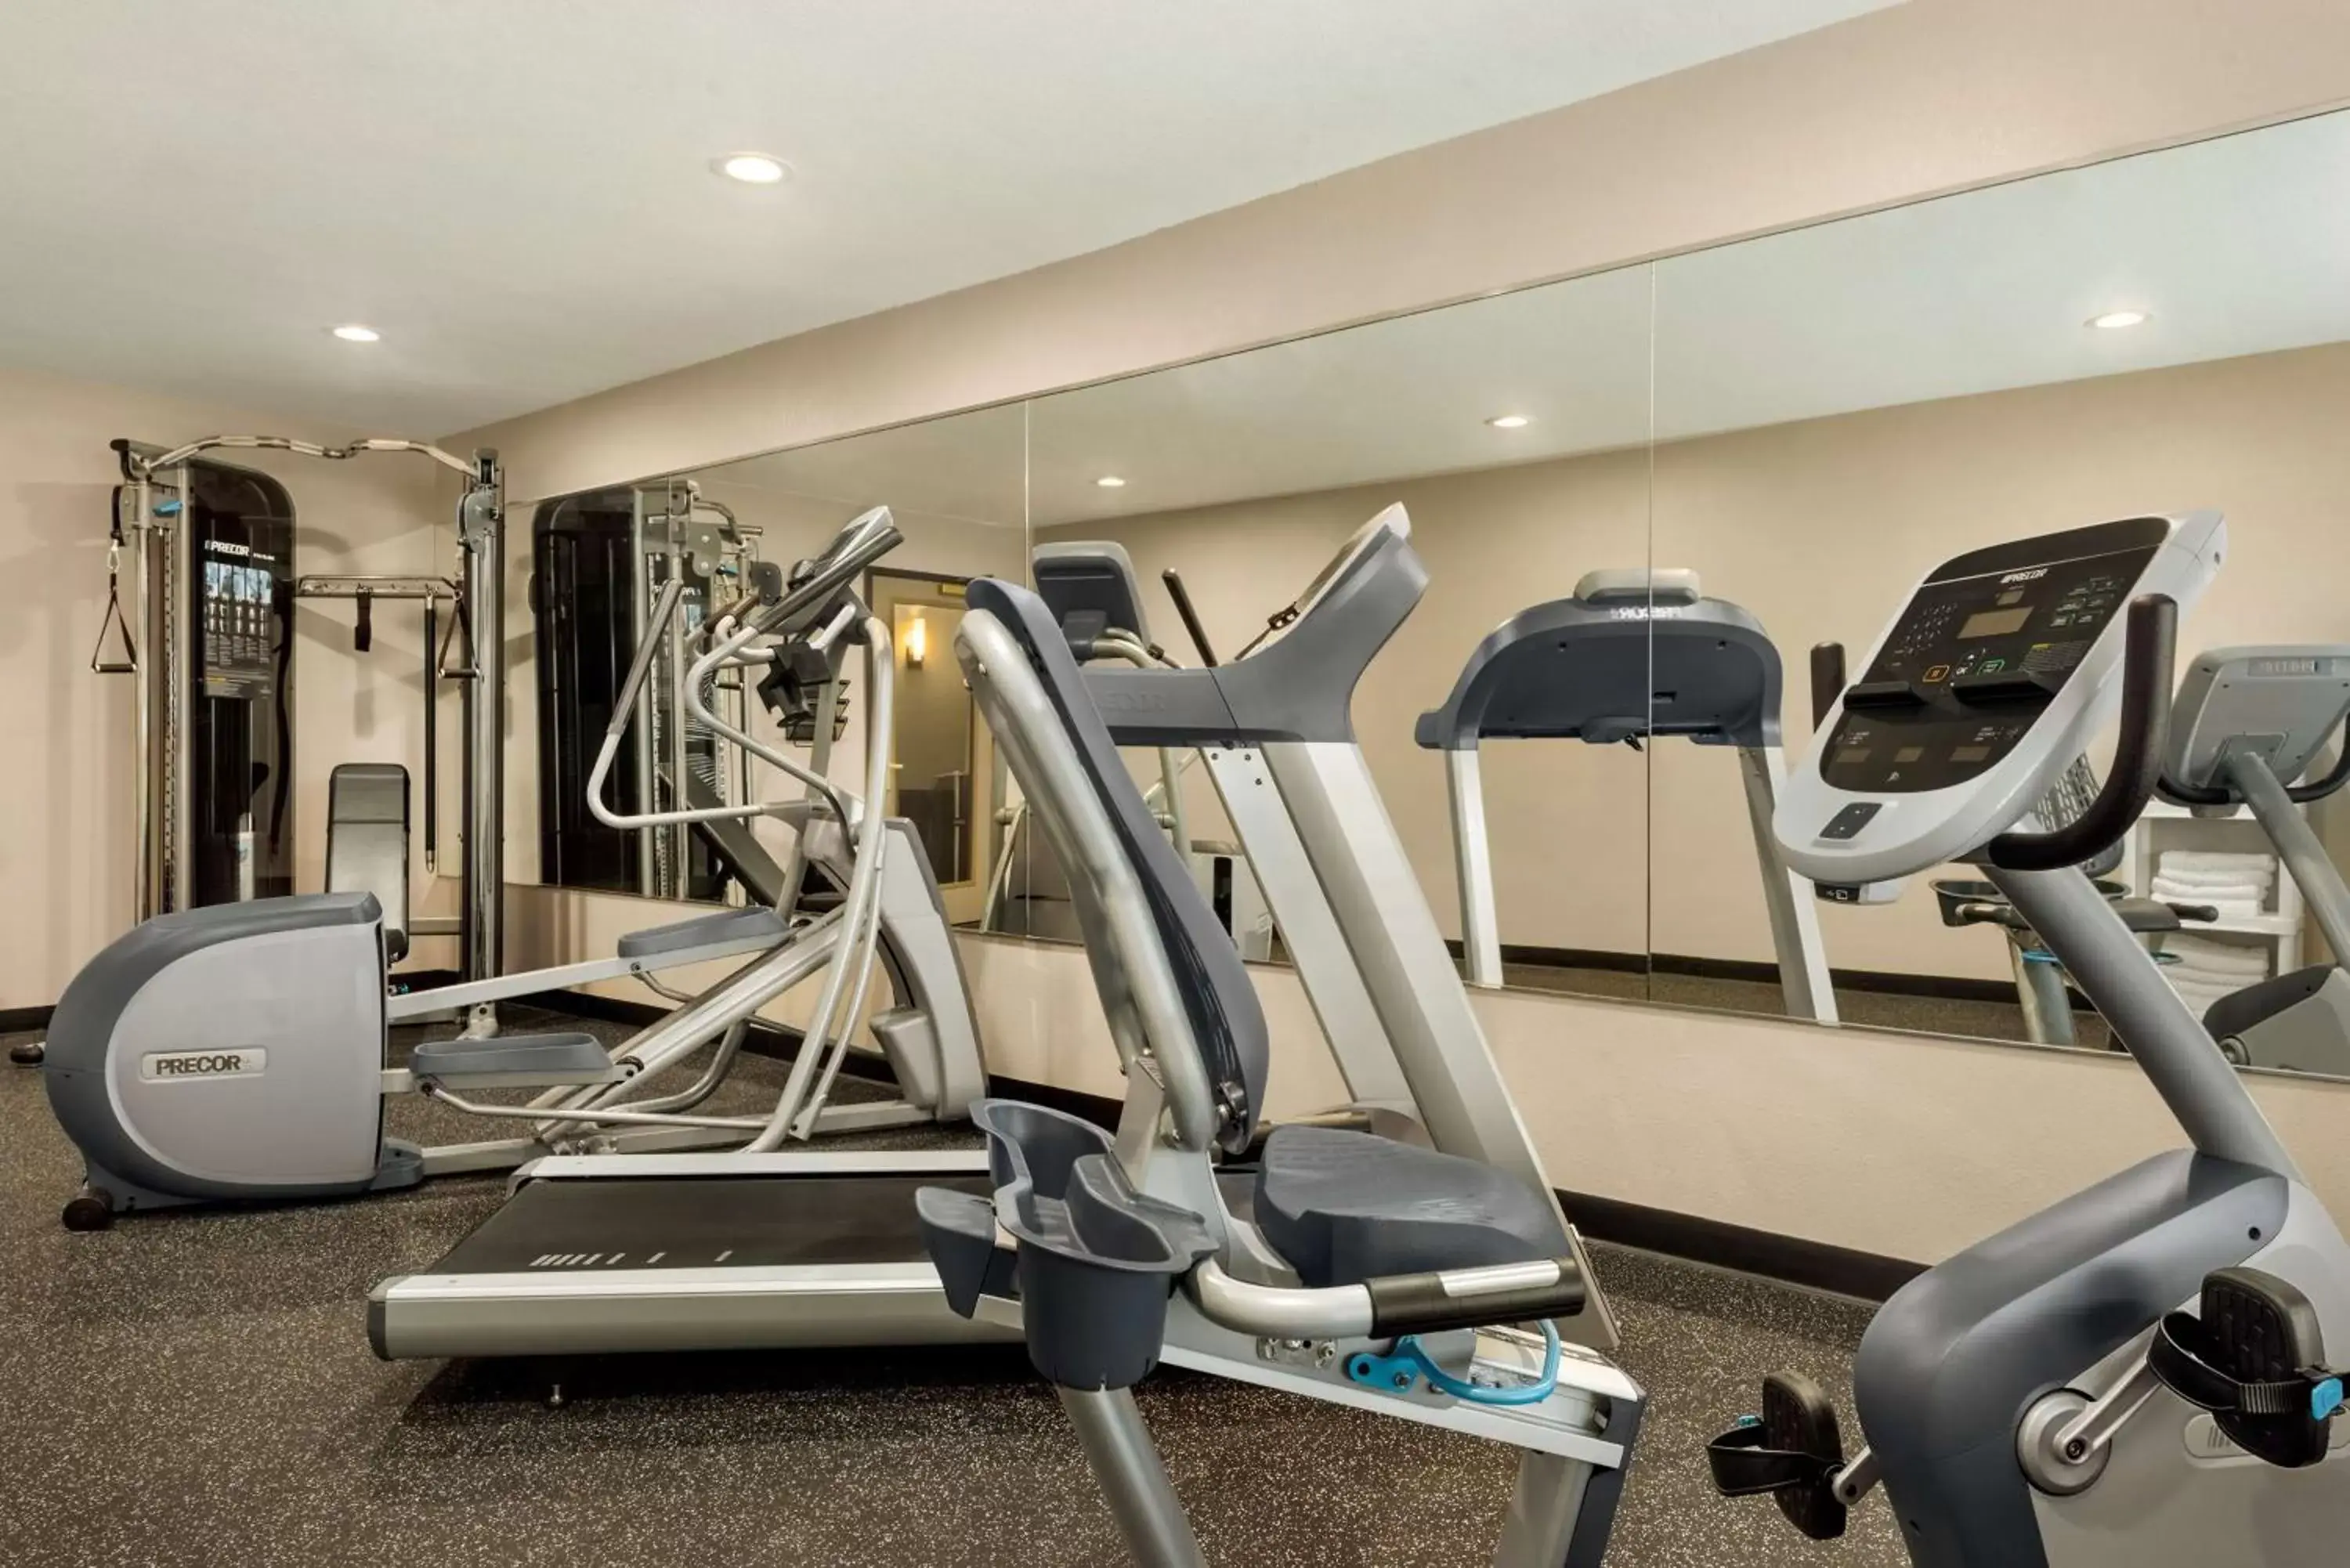 Activities, Fitness Center/Facilities in Country Inn & Suites by Radisson, Decorah, IA